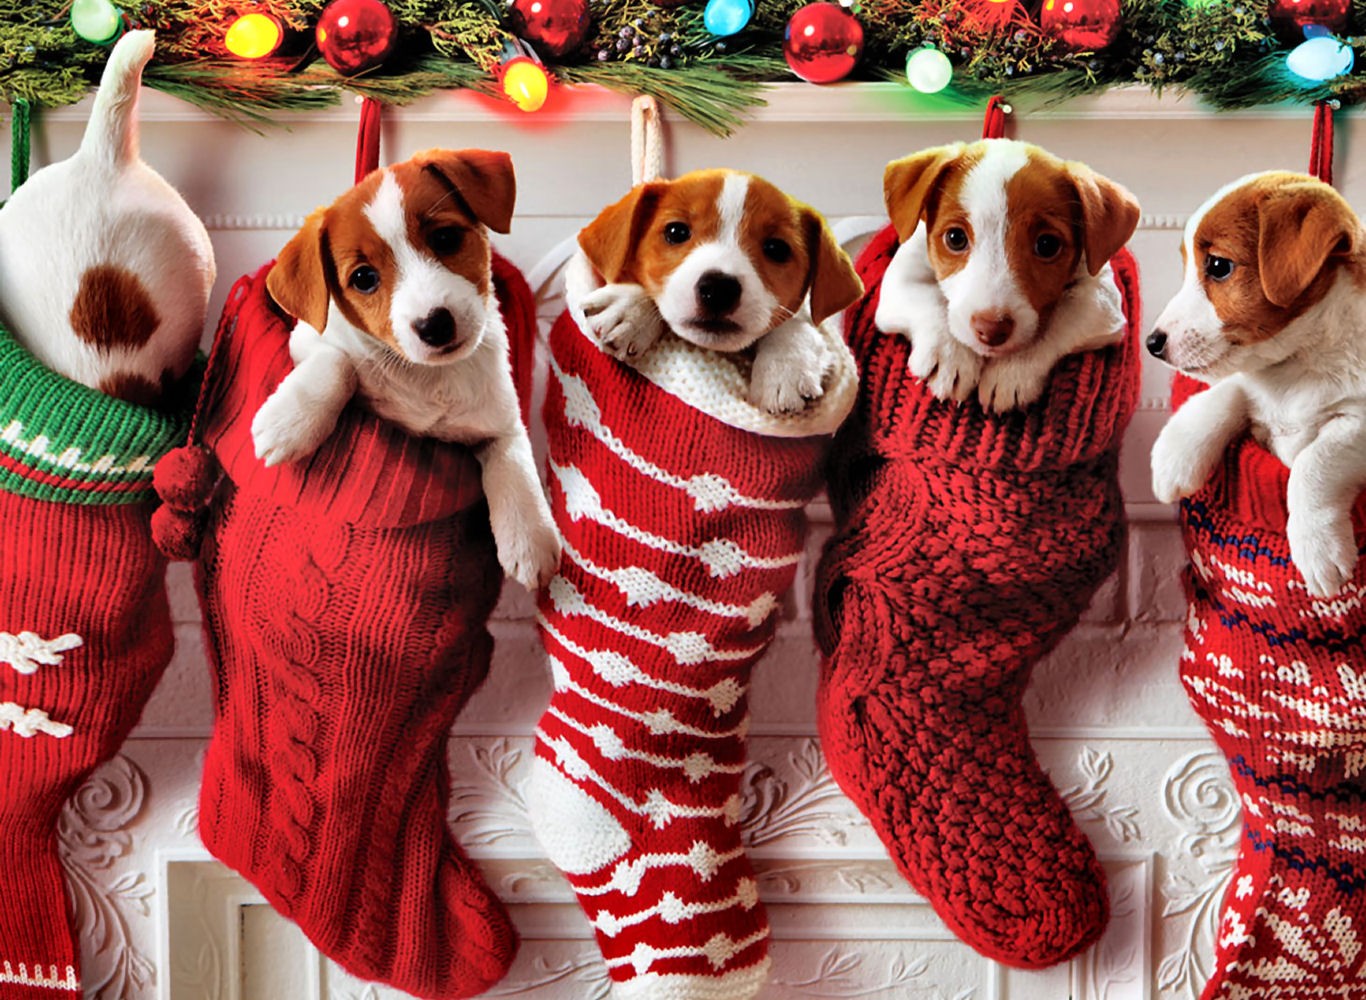 Dogs-Puppy-cats-Animals-Christmas-Photos-Images.jpg